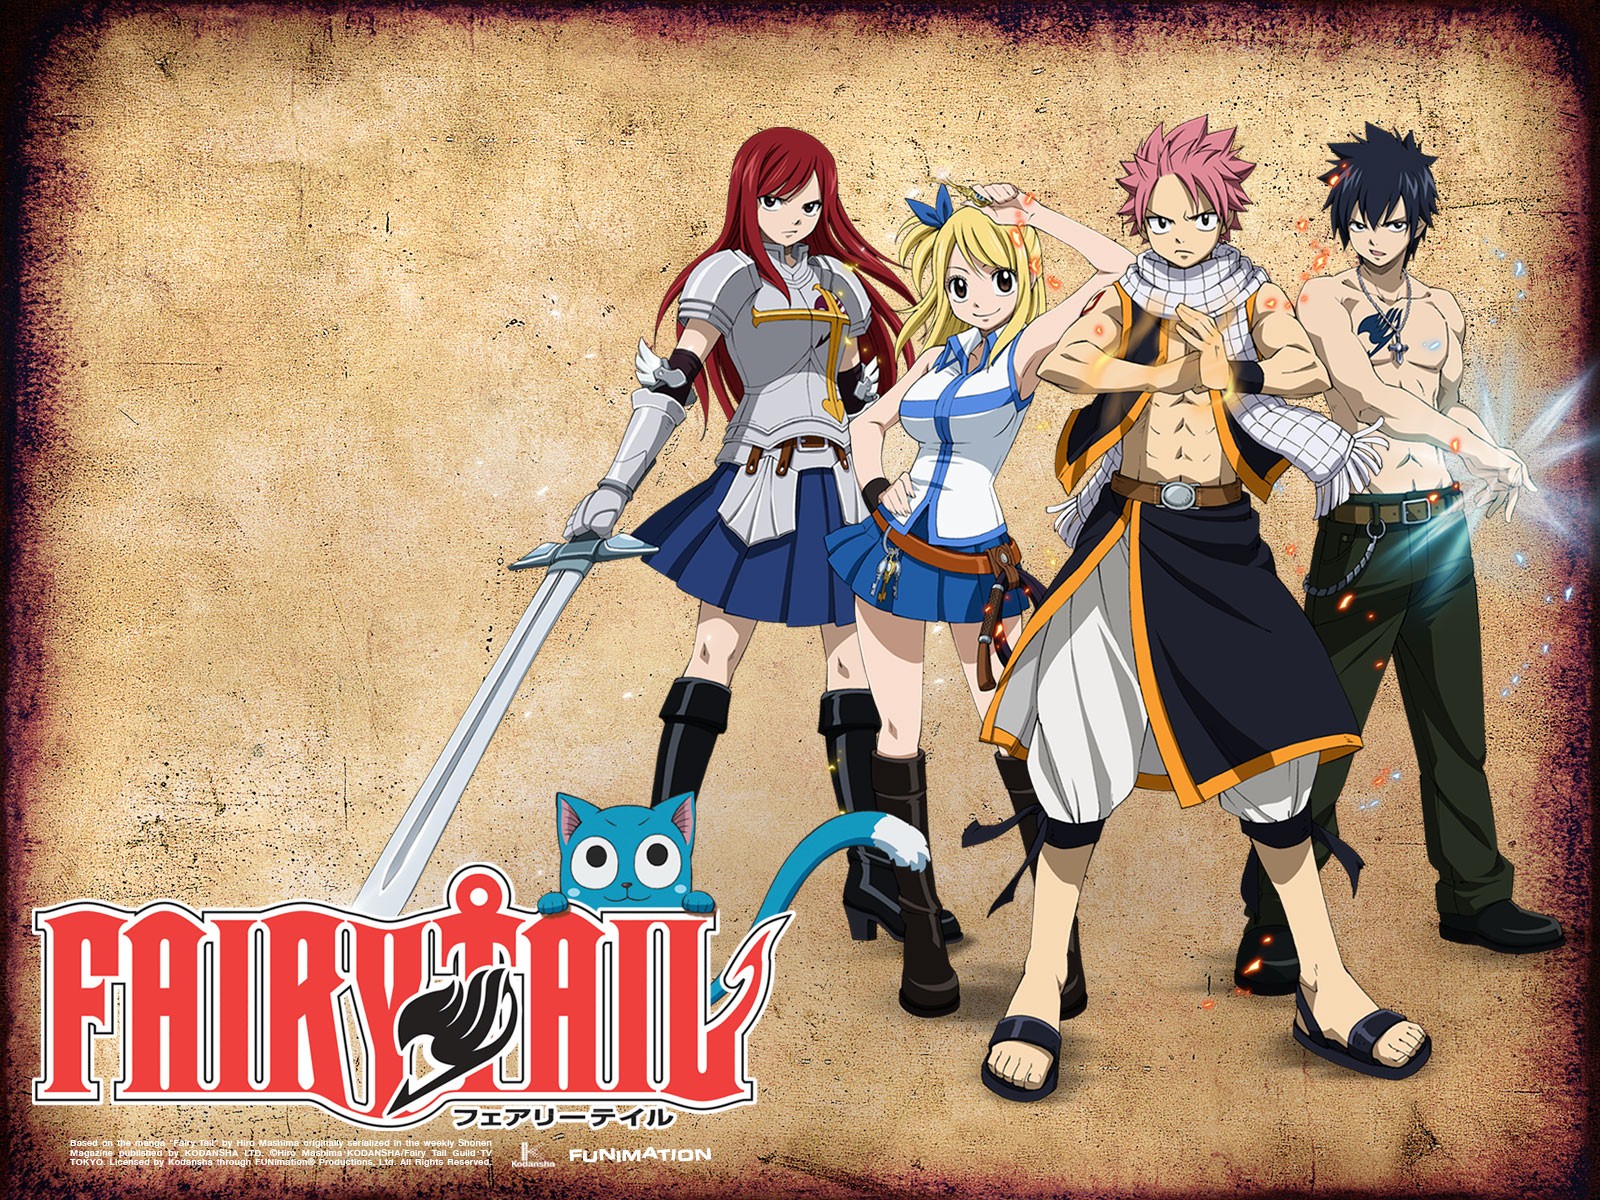 Fairy Tail Computer Wallpapers Desktop Backgrounds